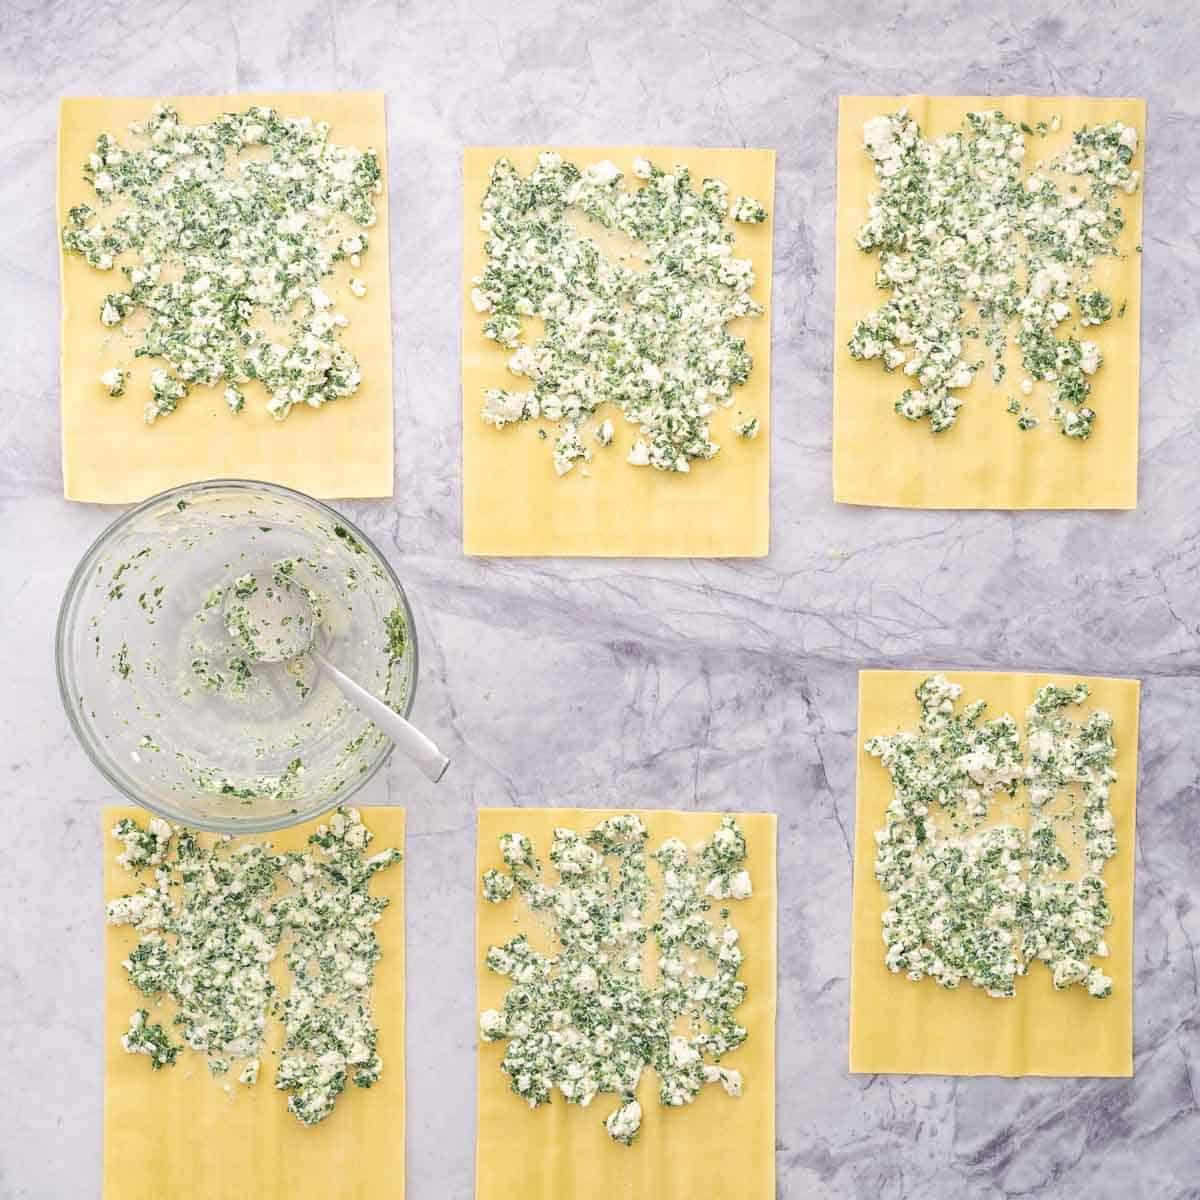 Fresh lasagne sheets laid out on the bench with each sheet spread with a layer of spinach and cottage cheese mixture.